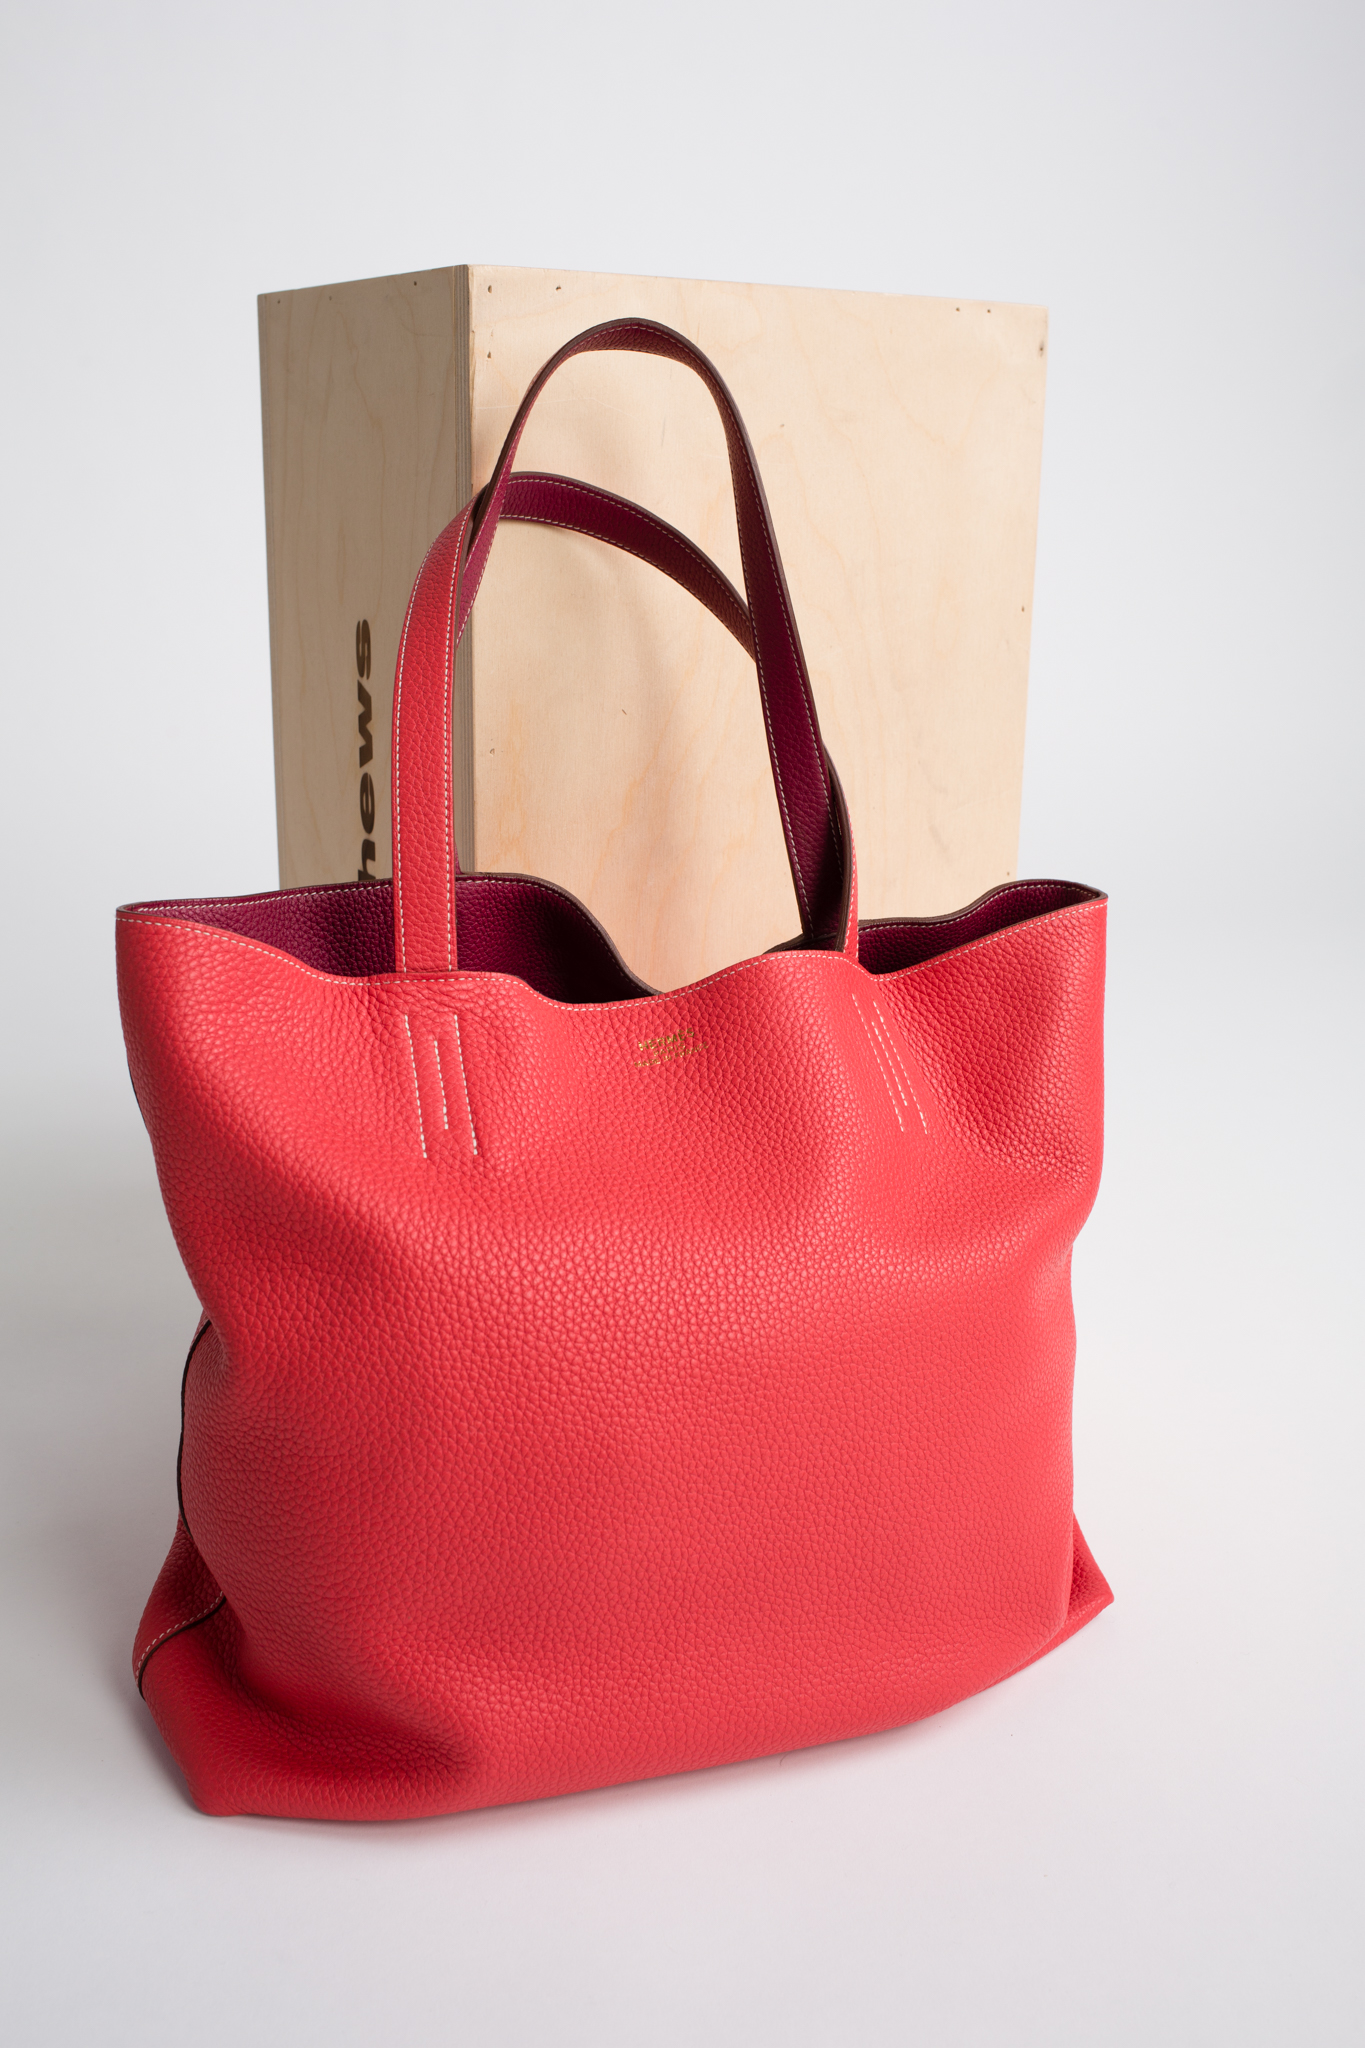 Hermes Double Sens Rose and Cigare Sikkim Leather tote